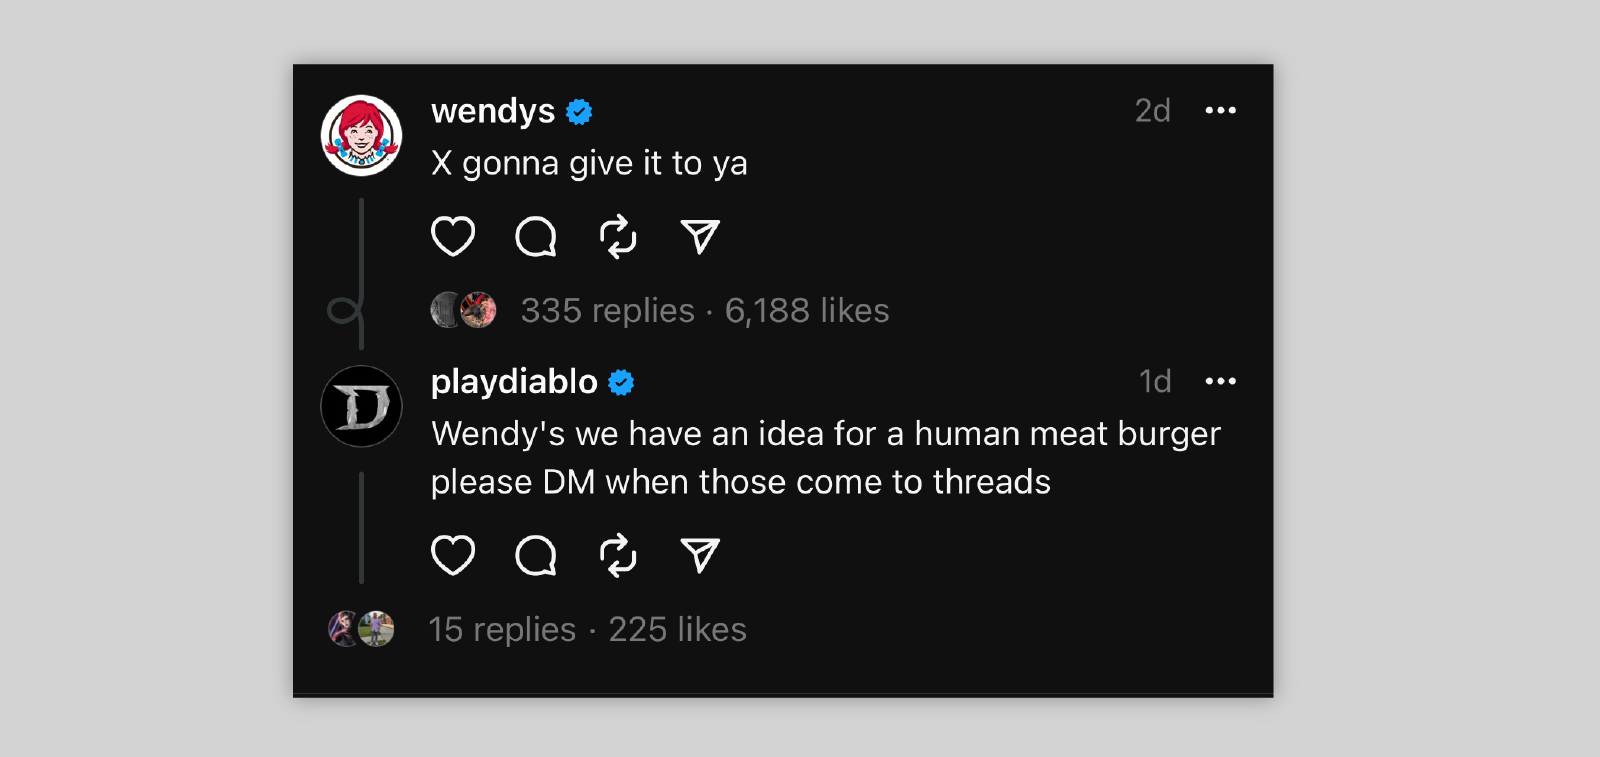 Two brands having a playful exchange on Threads